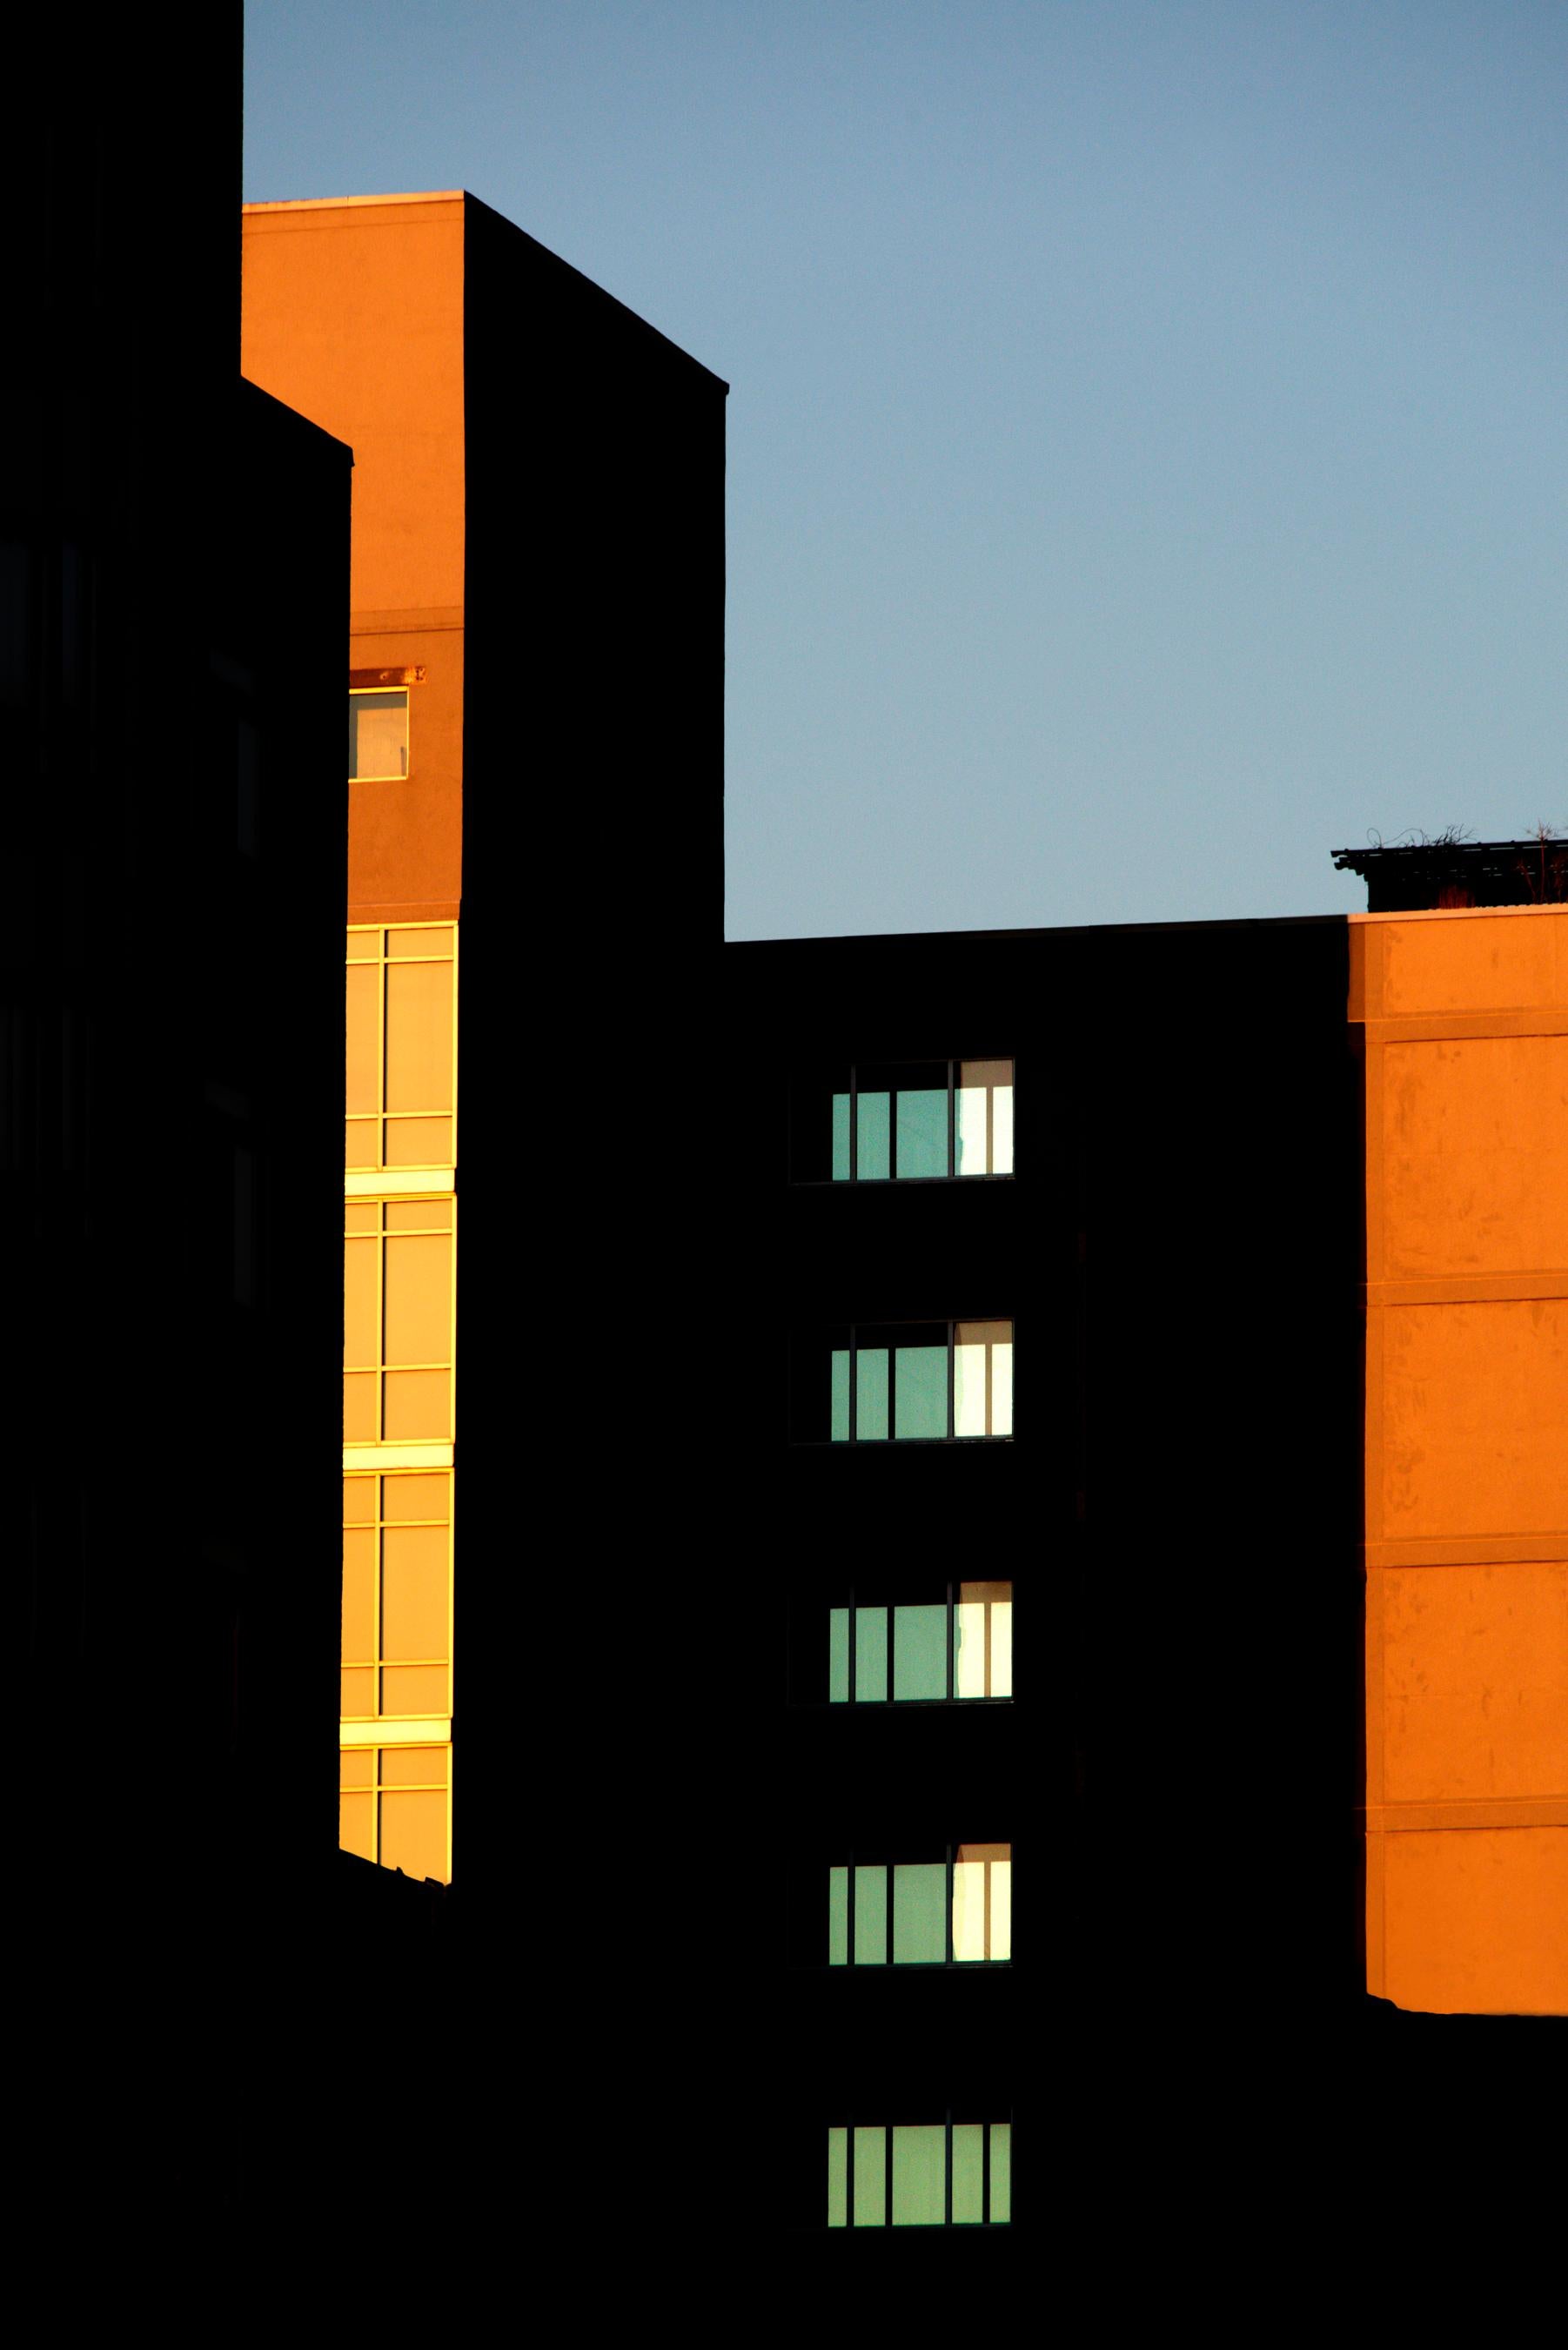 Bob Krasner Color Photograph - "Brooklyn Abstract", photograph, city, architecture, geometry, pattern, color